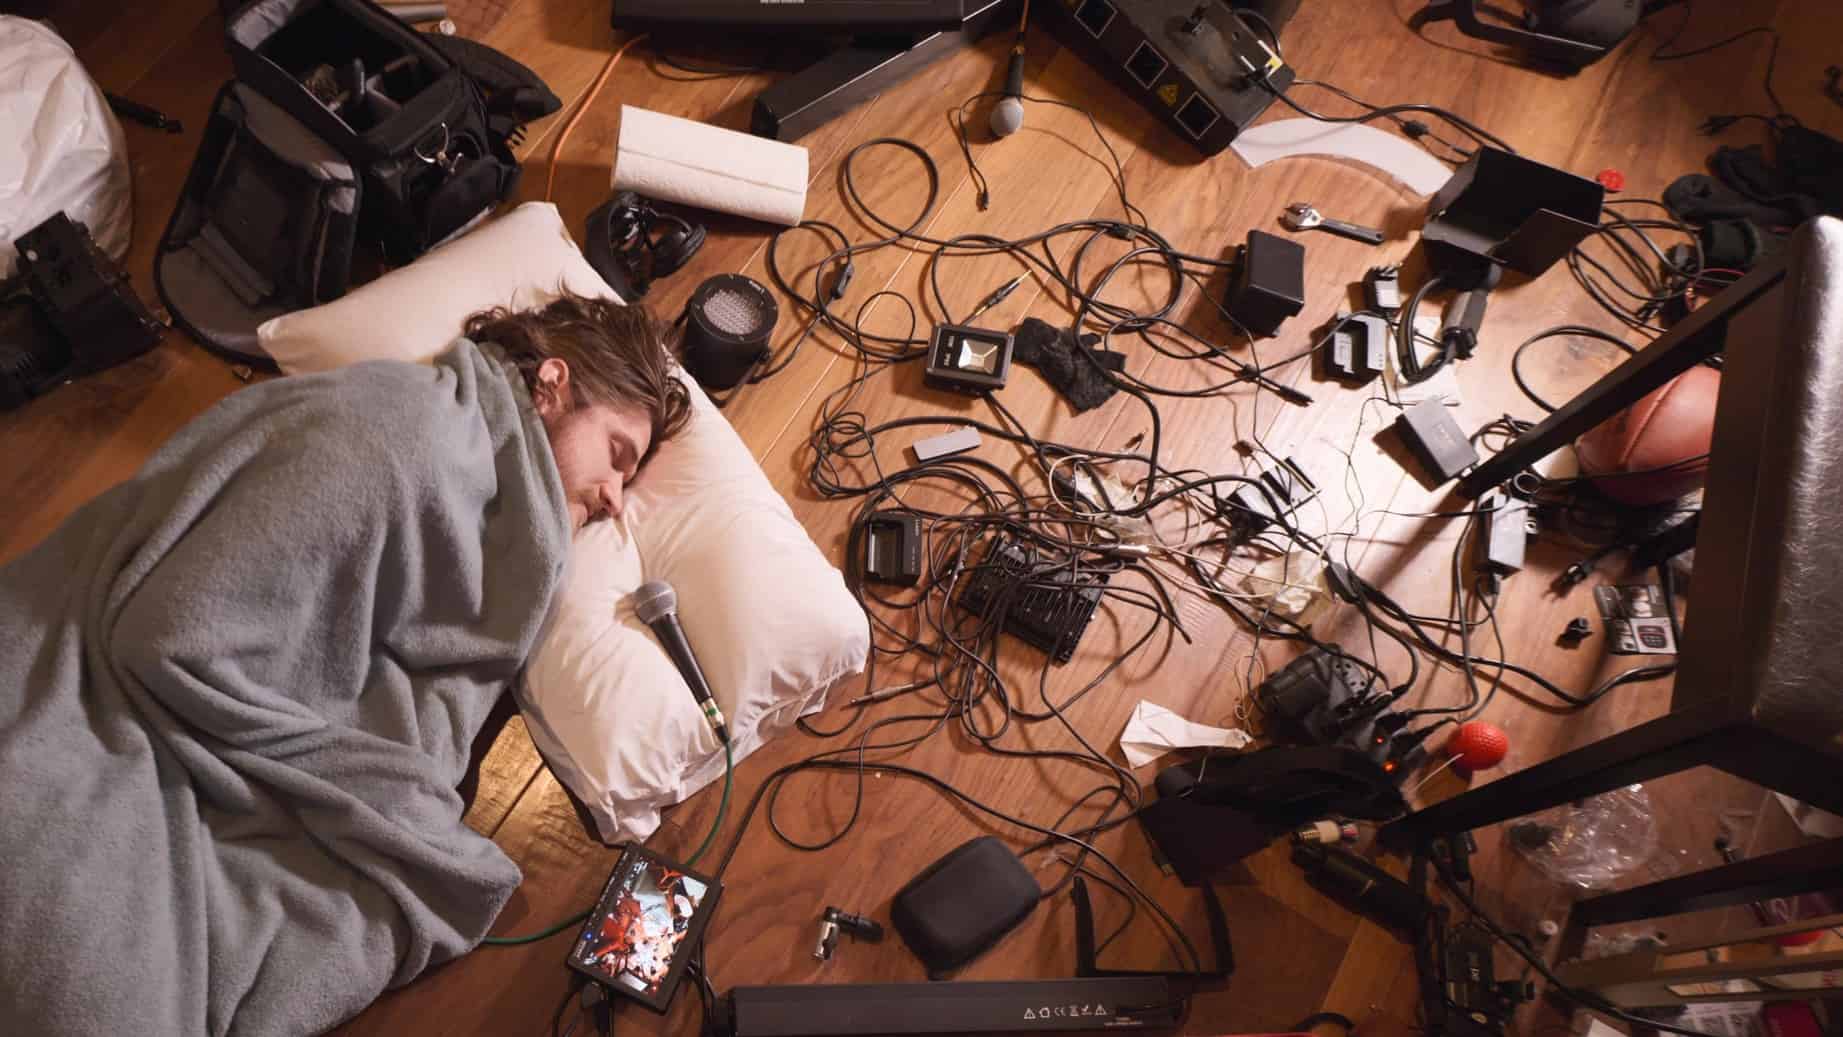 A man sleeps on the floor surrounded by recording equipment in this image from Attic Bedroom.